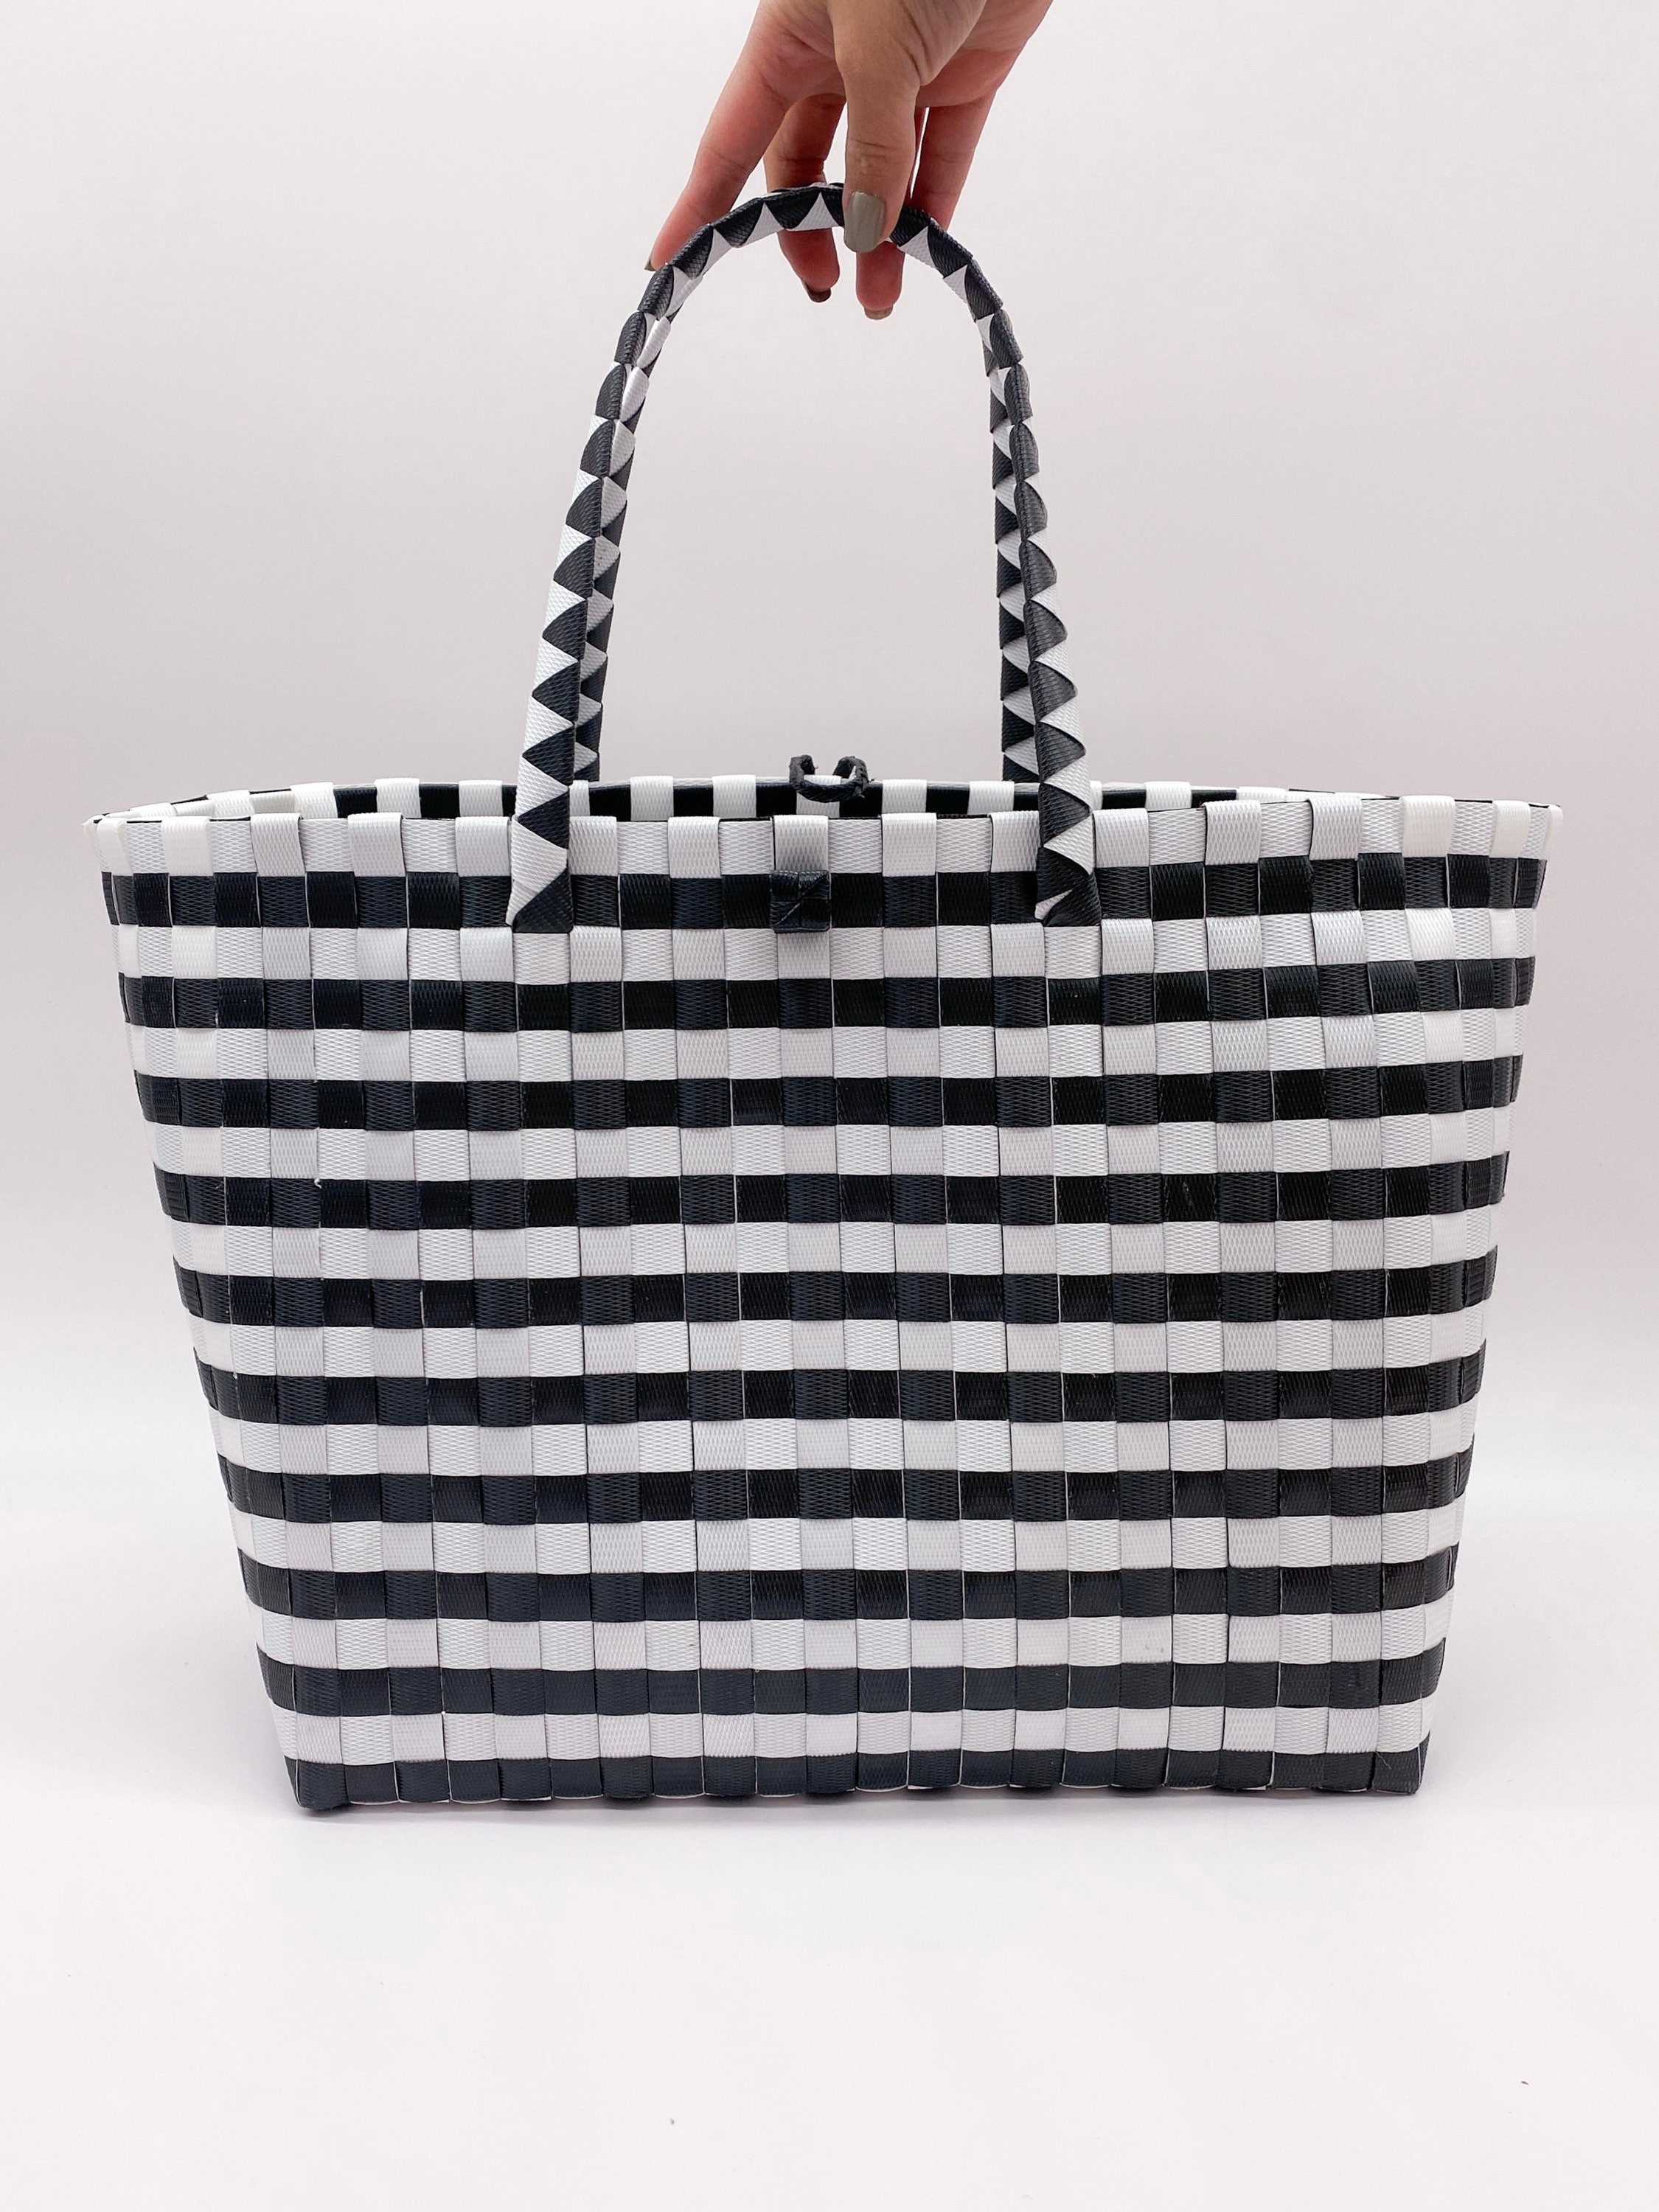 HANDLES TOTE BAG, Striped Tote Bag, Handwoven Recycled Plastic Tote Bag ...